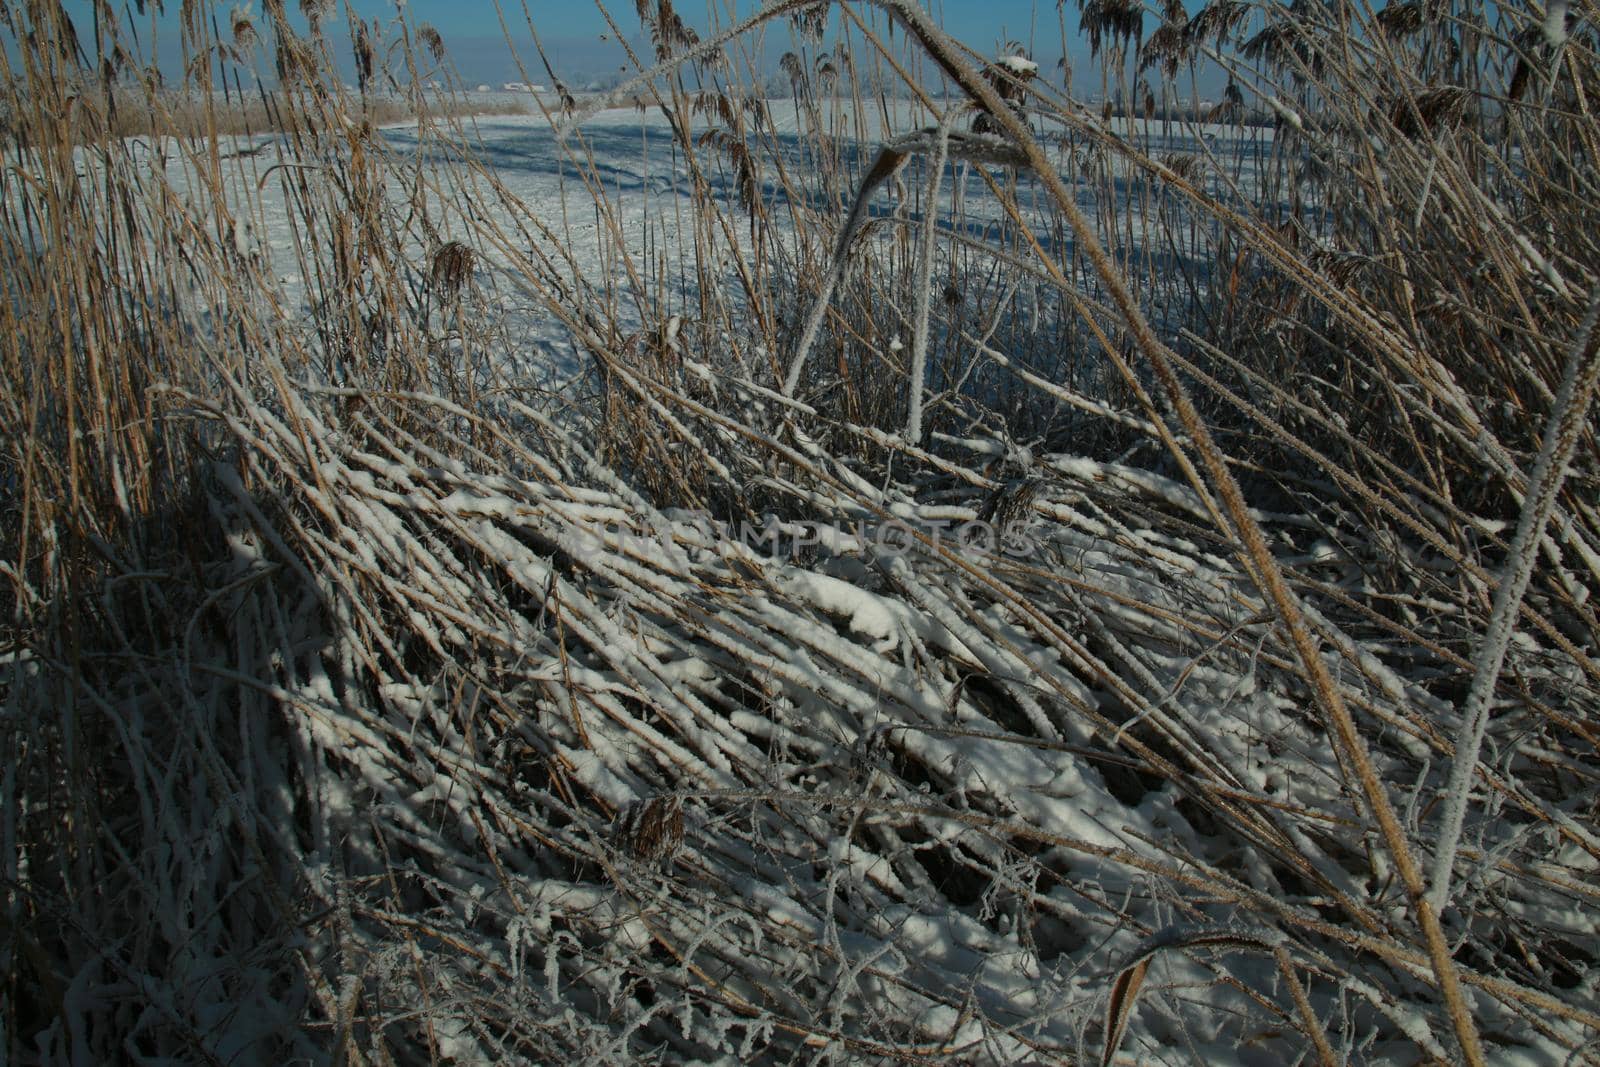 Iced reeds in front of a rural winter landscape